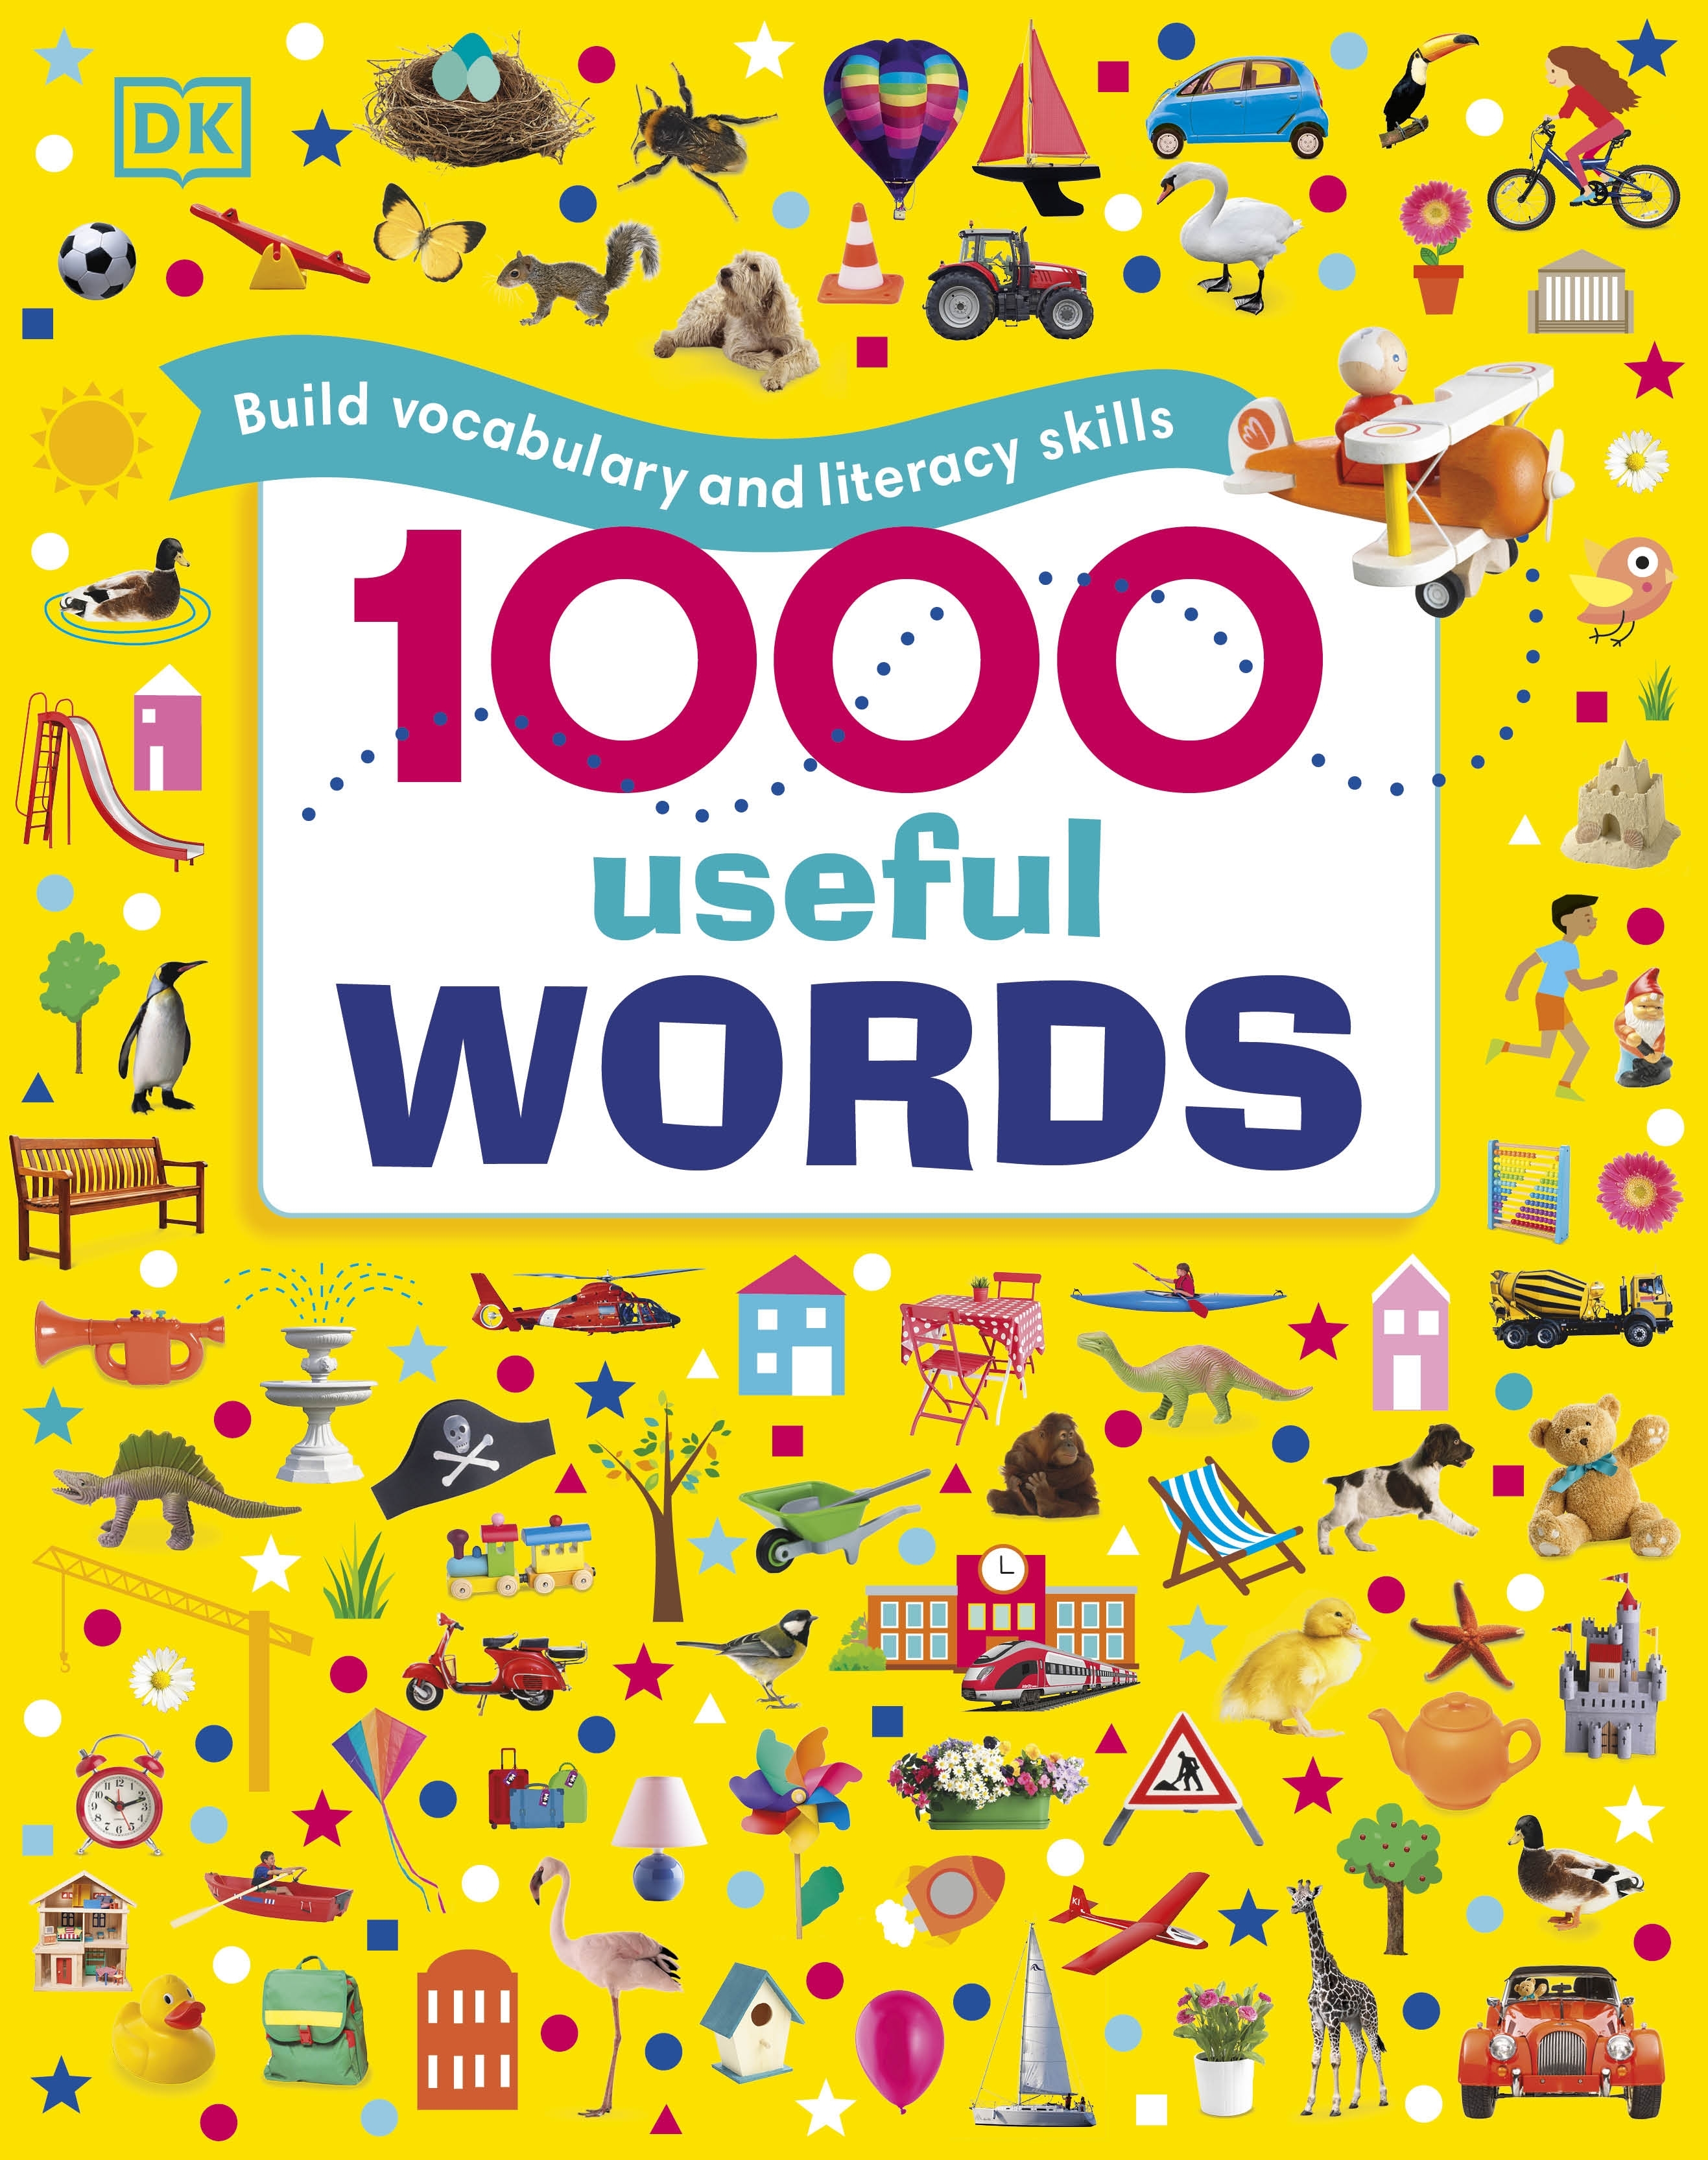 1000-useful-words-by-dk-penguin-books-new-zealand